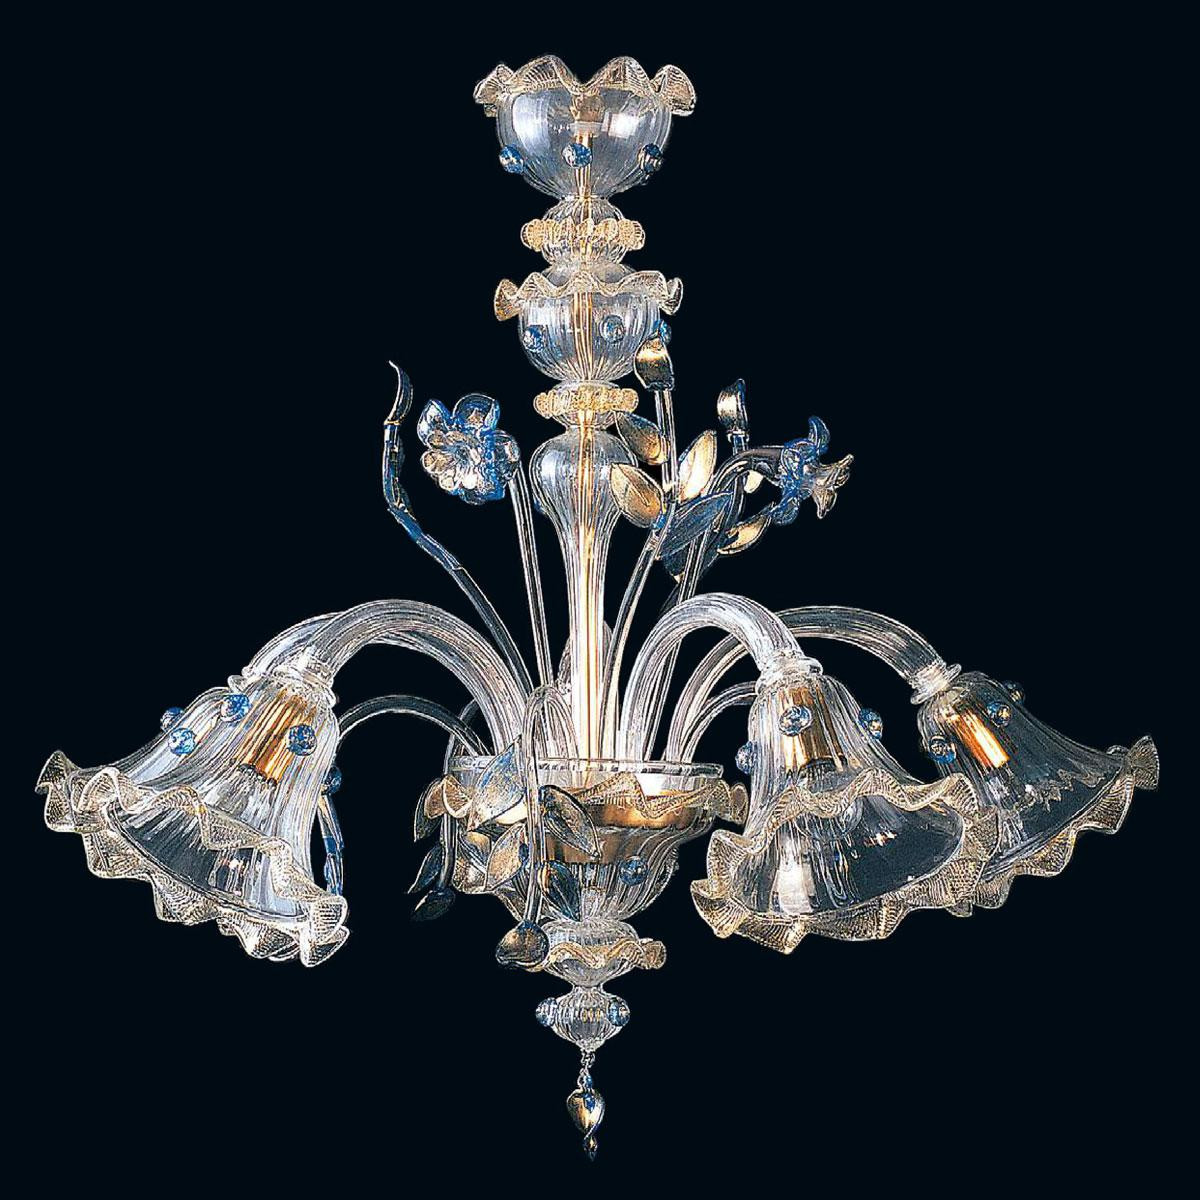 "Bessie" Murano glass chandelier - 5 lights - transparent, blue and gold